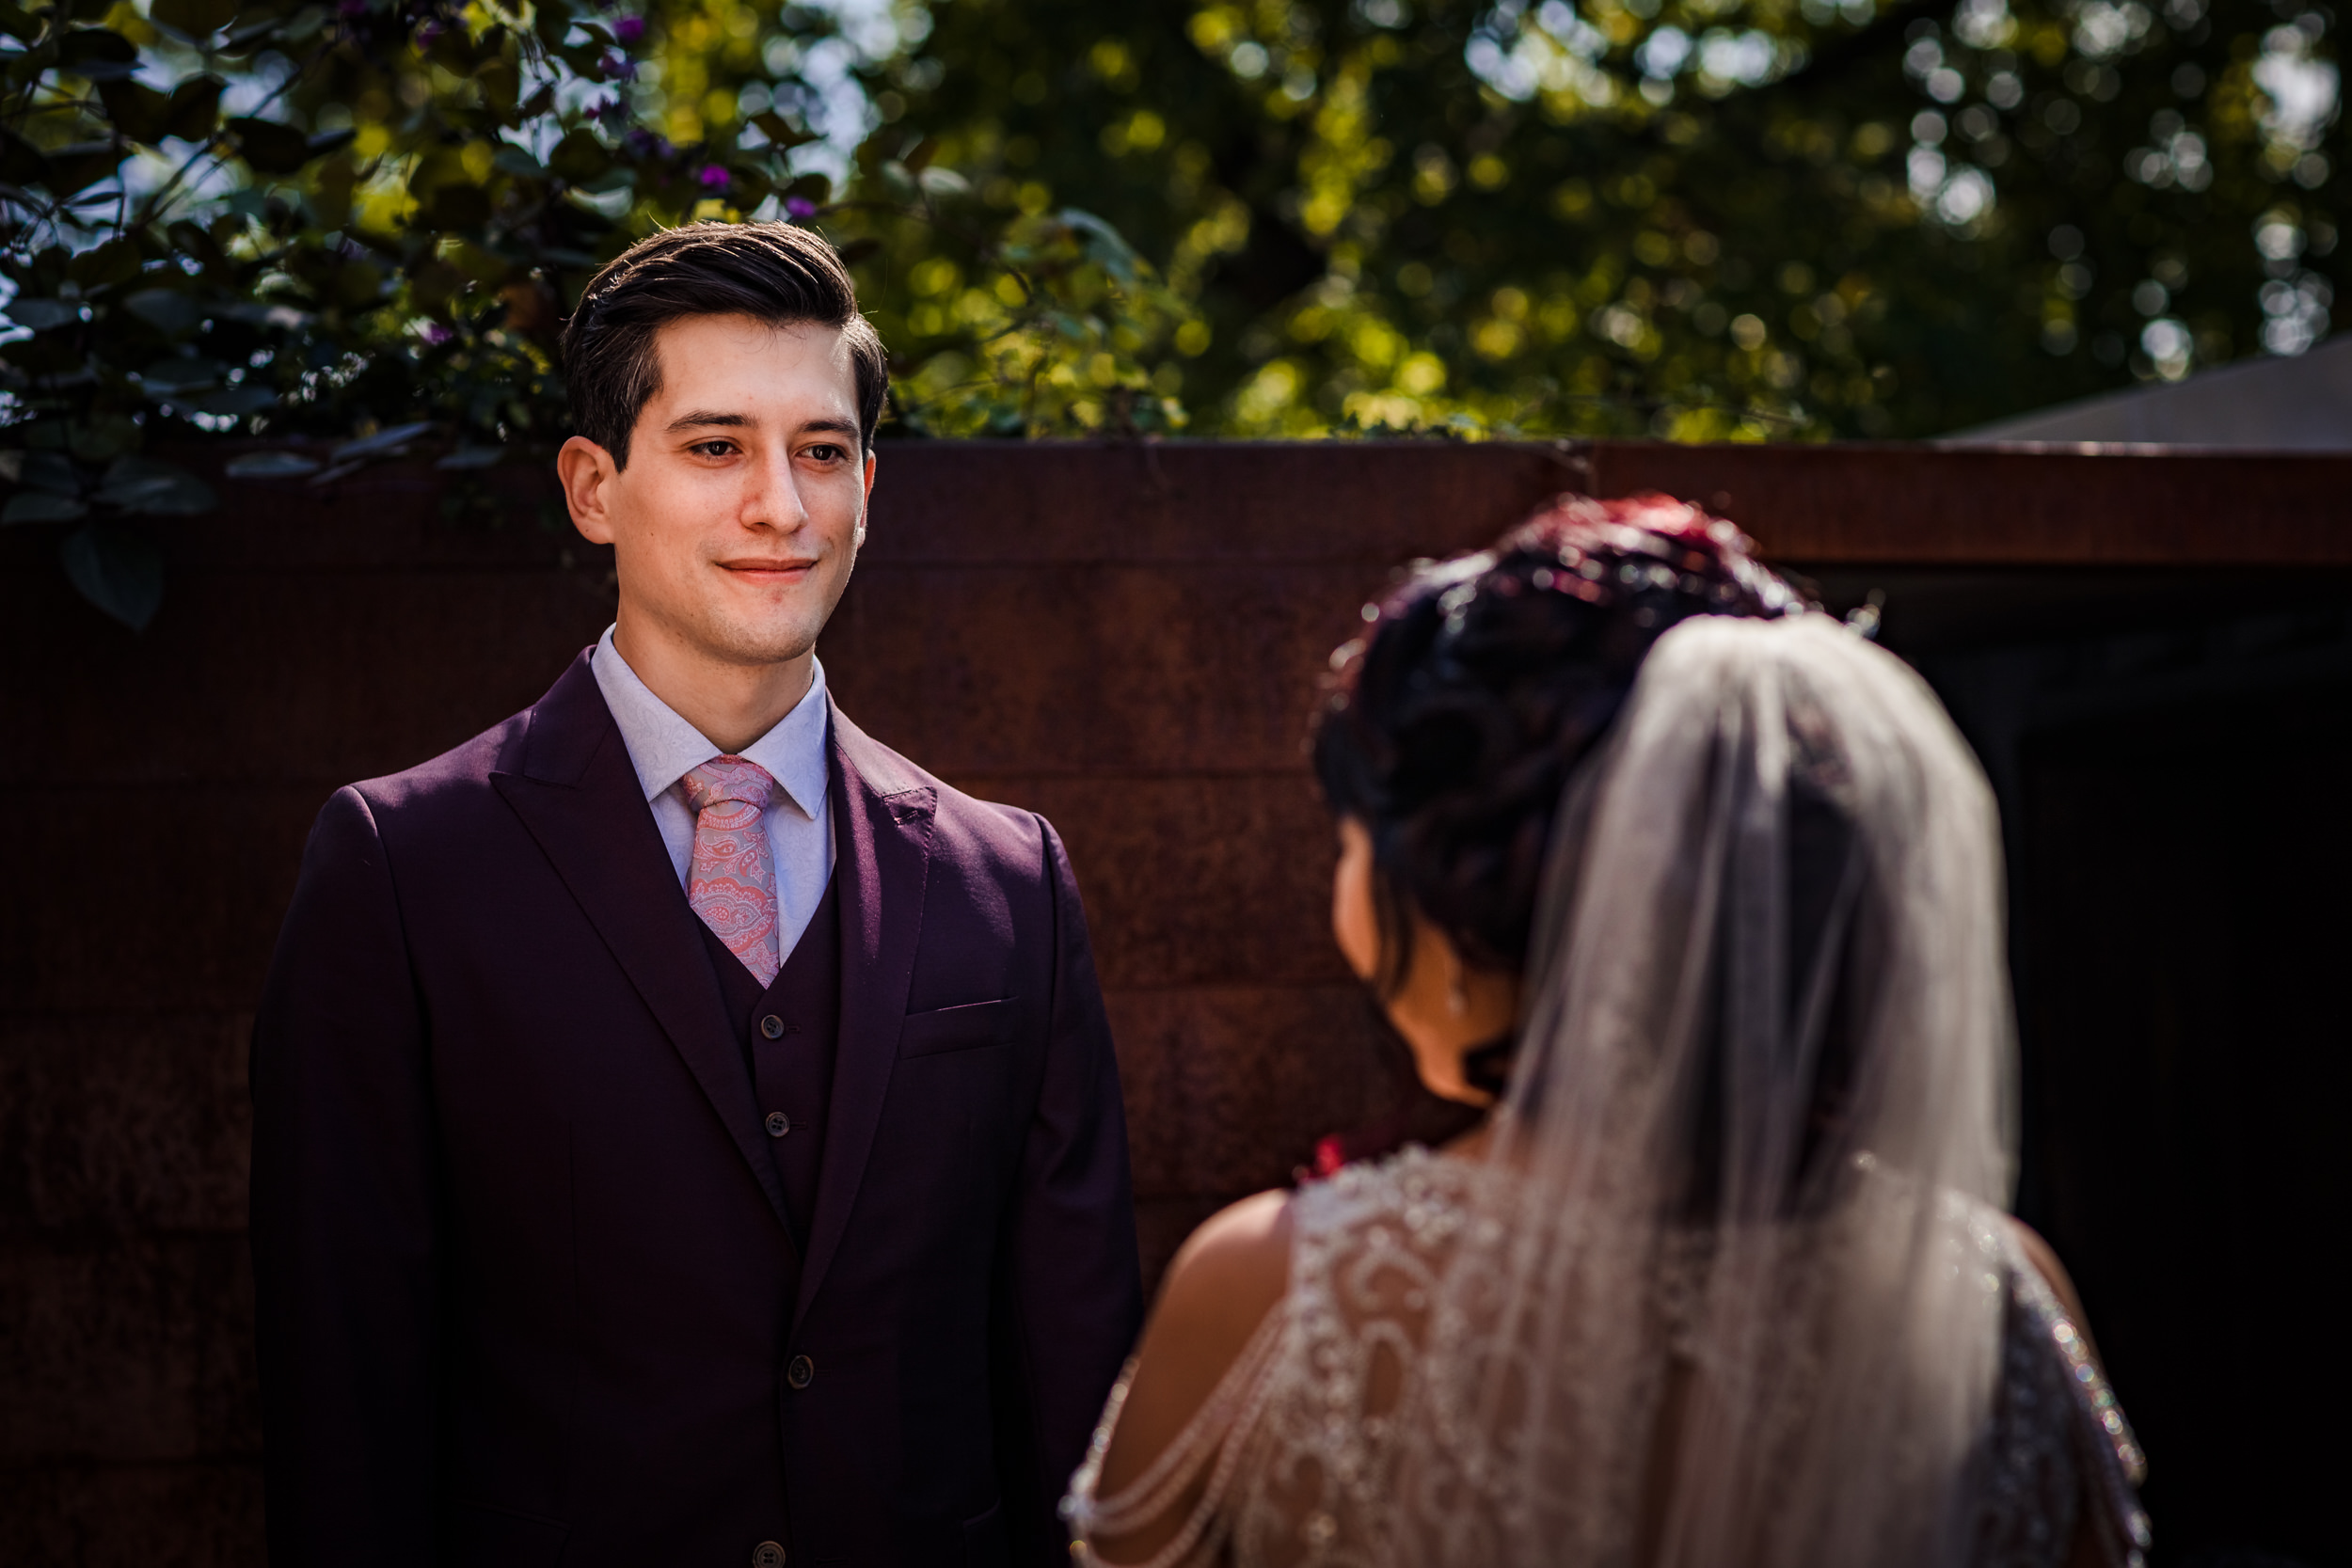 A groom smiles while seeing his bride for the first time during a wedding at the Joinery.